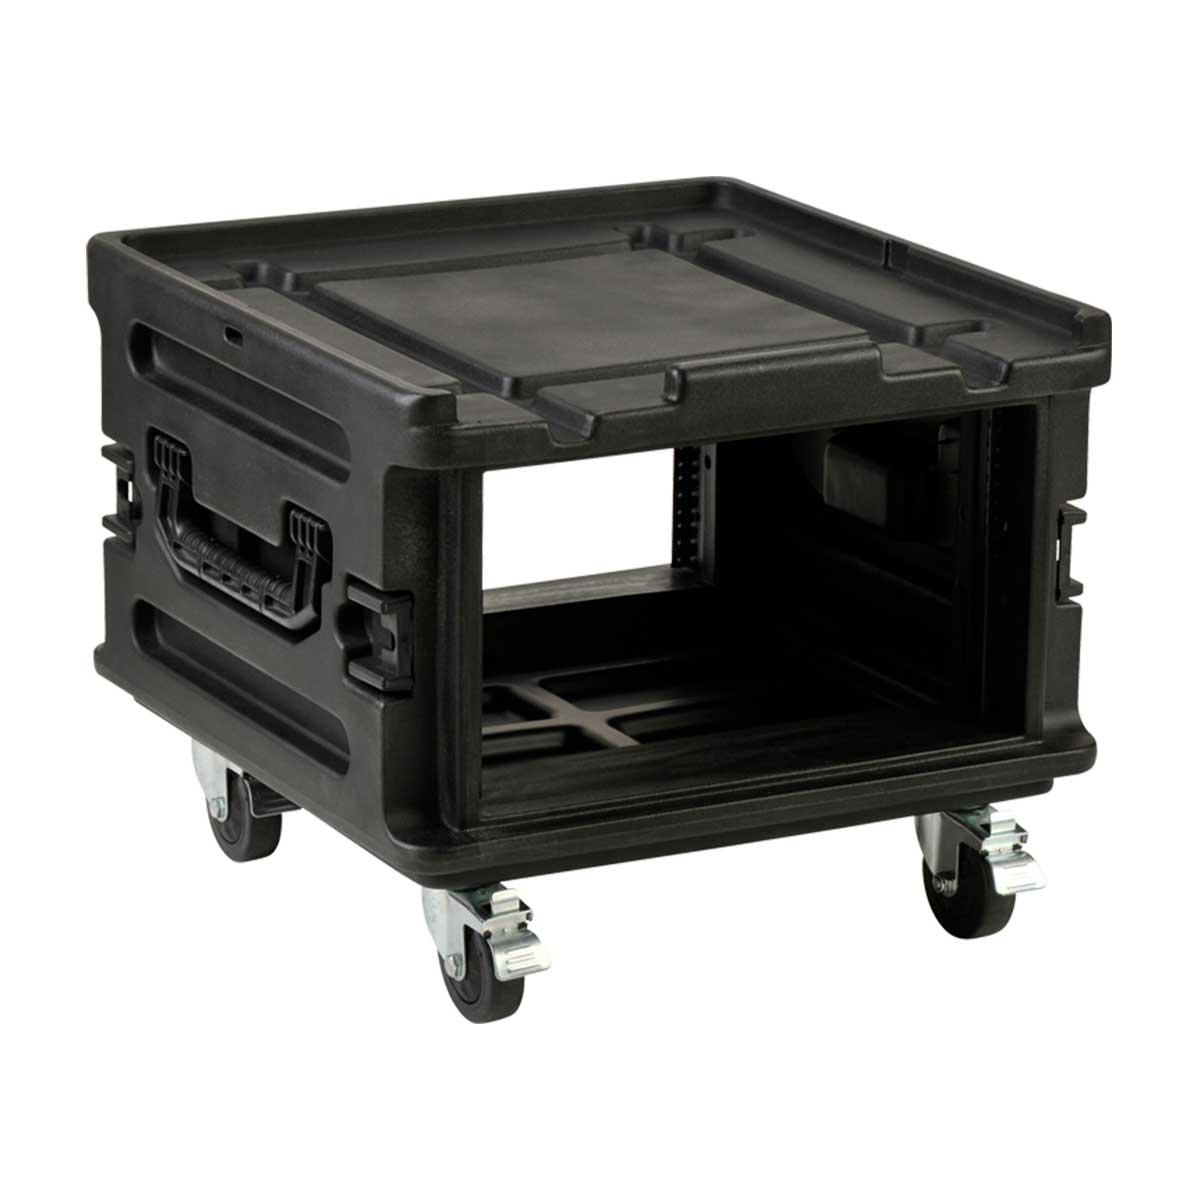 SKB Roto Molded Rack Expansion Case (with wheels)